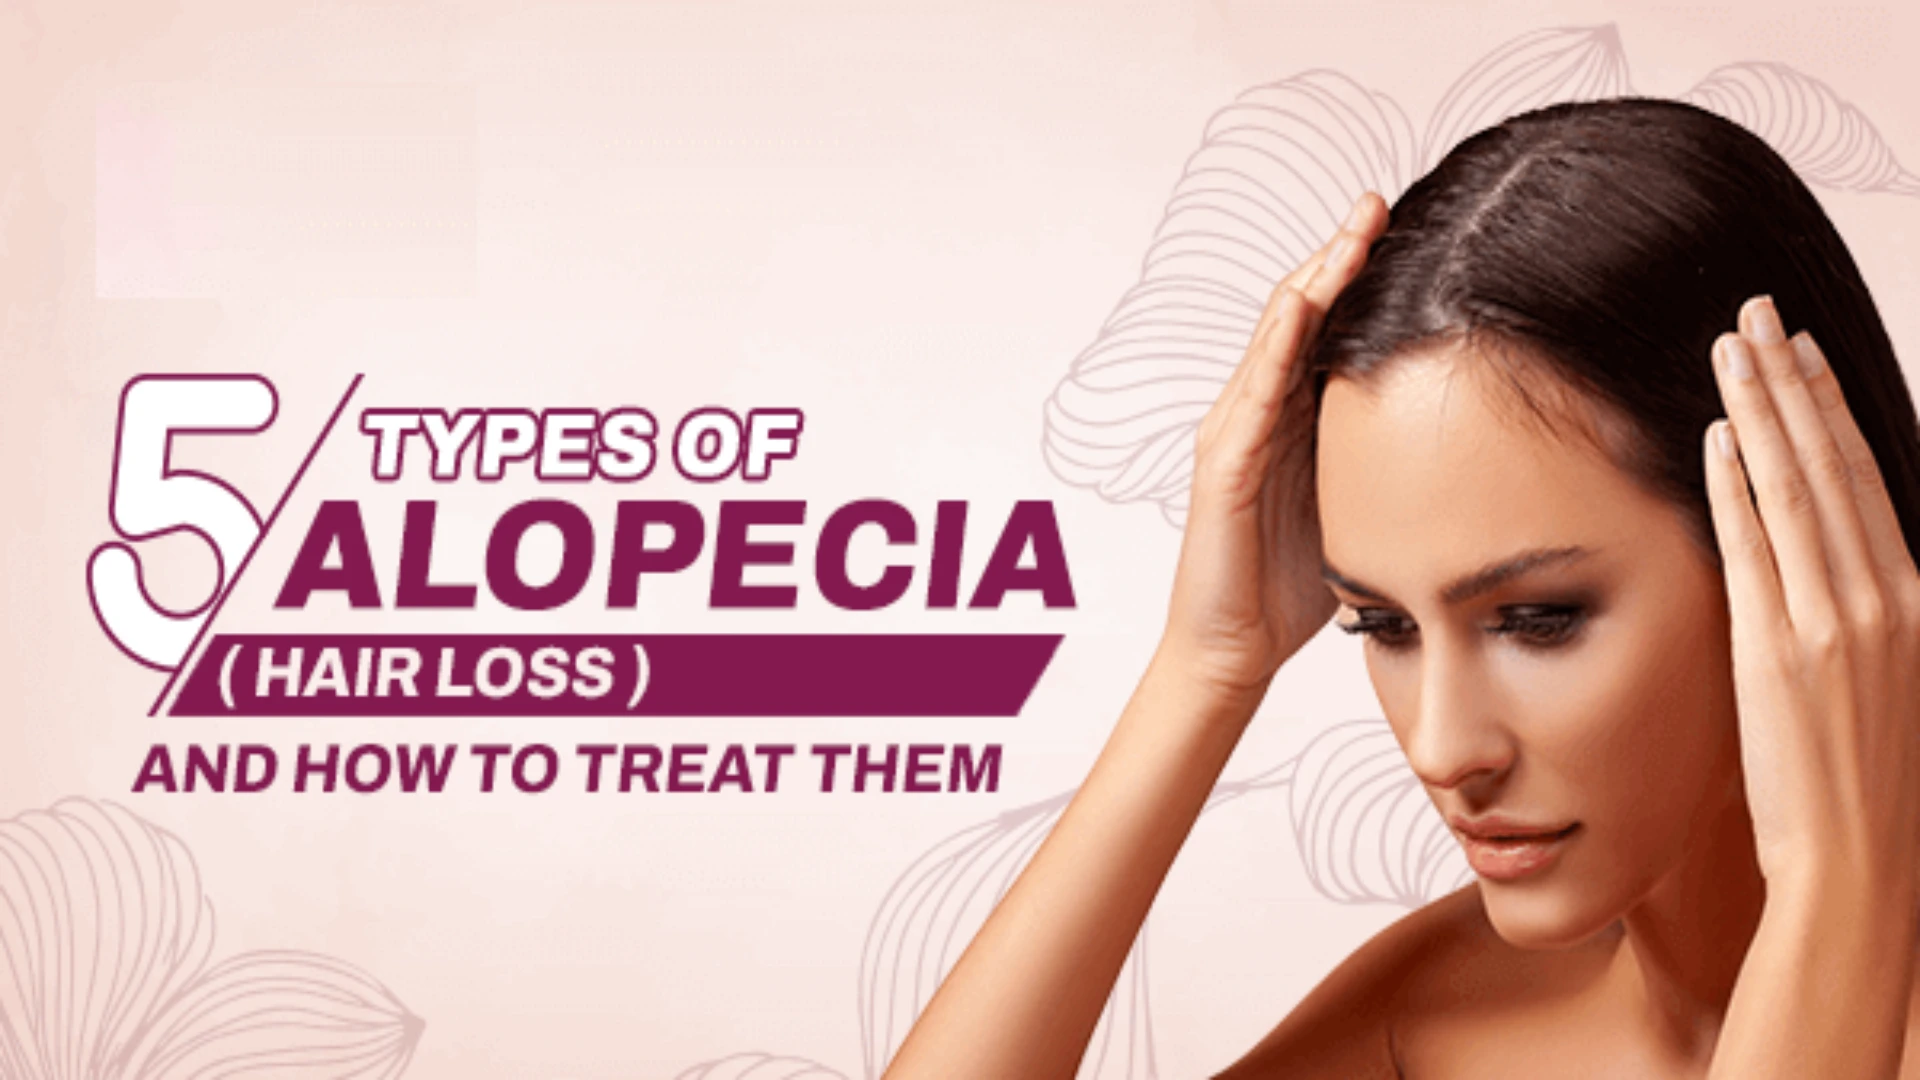 Discover the 5 common types of alopecia, their causes, and hair loss solutions.